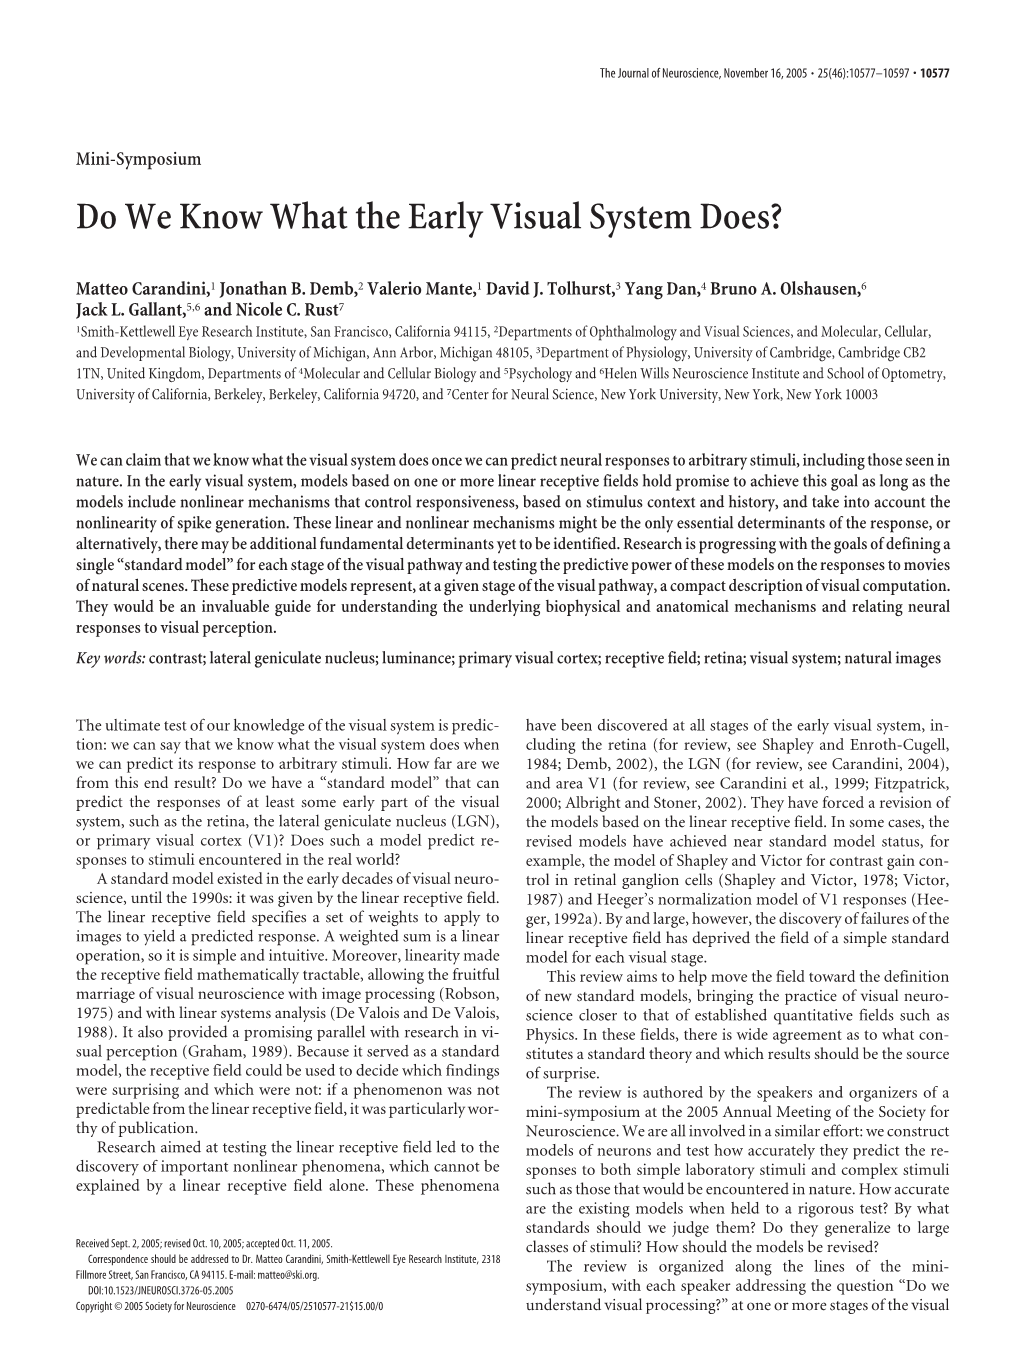 Do We Know What the Early Visual System Does?